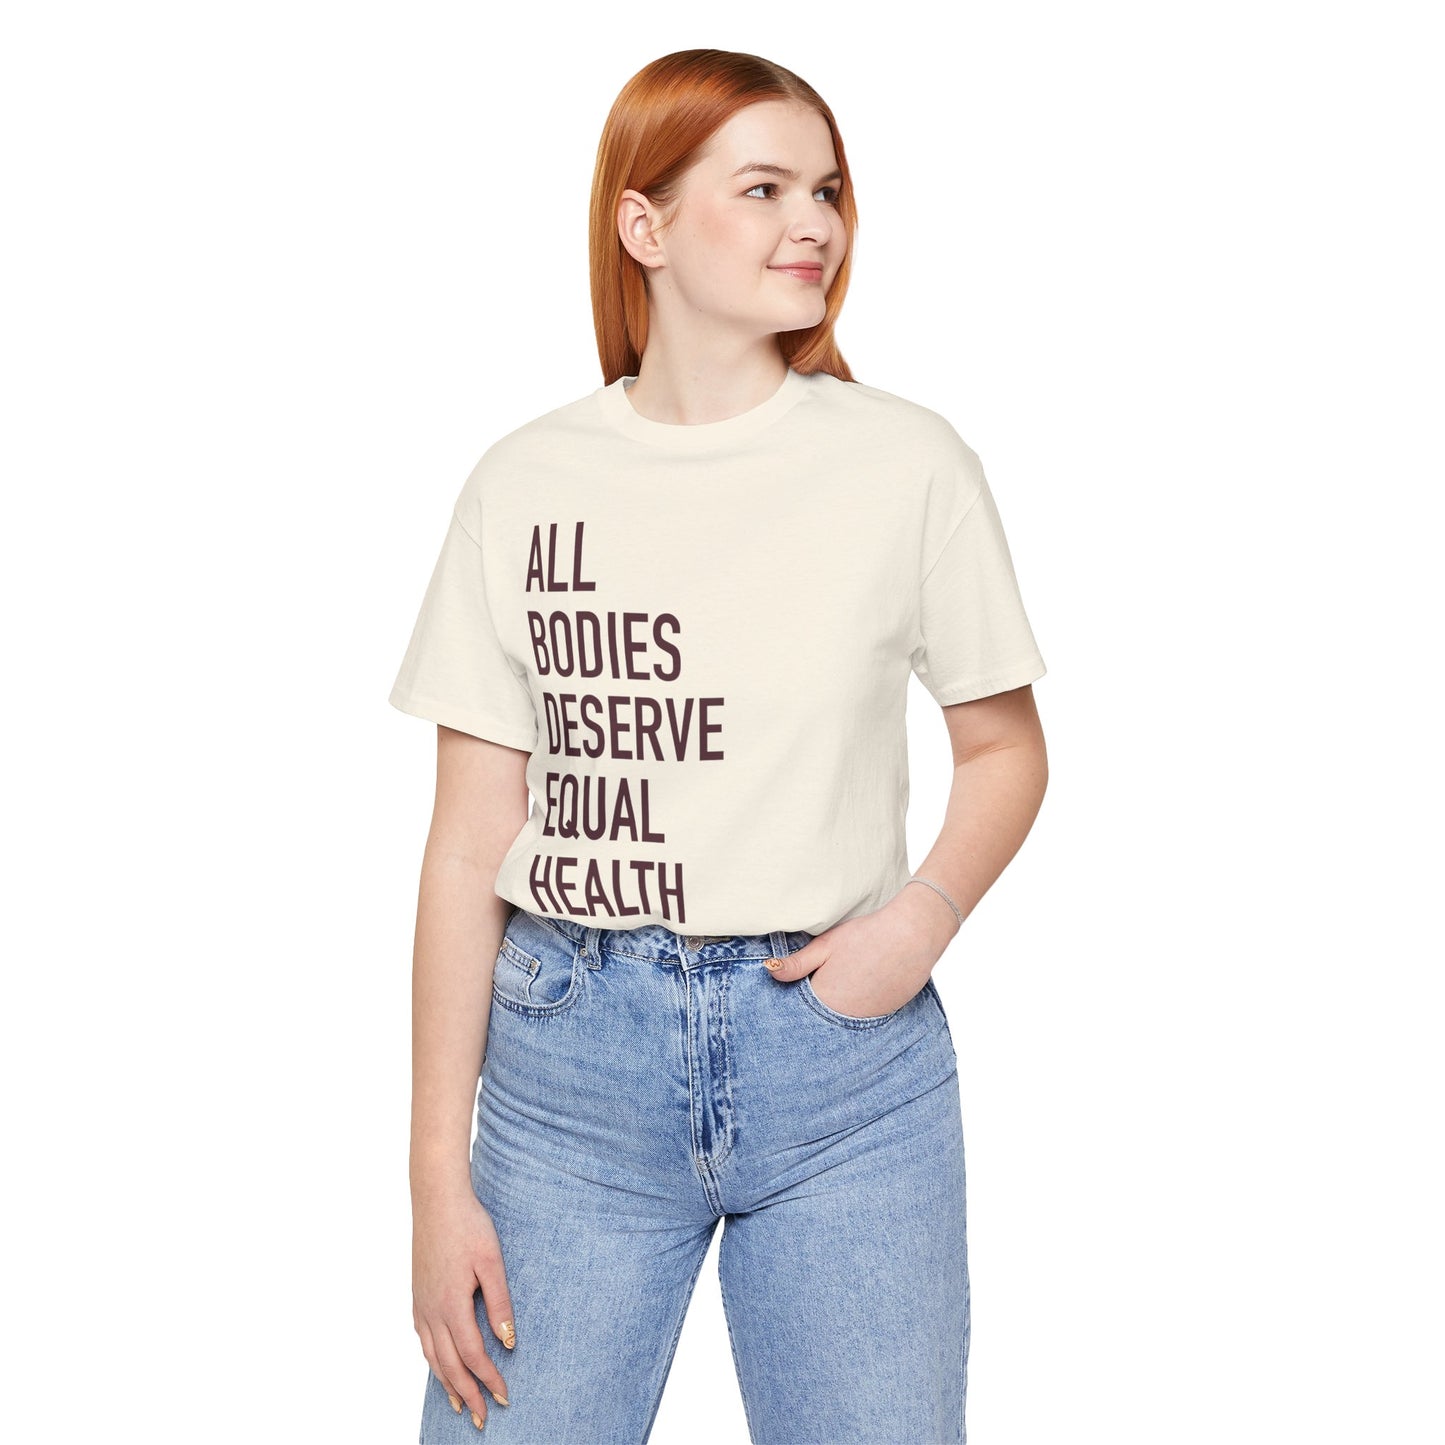 All Bodies Deserve Equal Health Care Tee